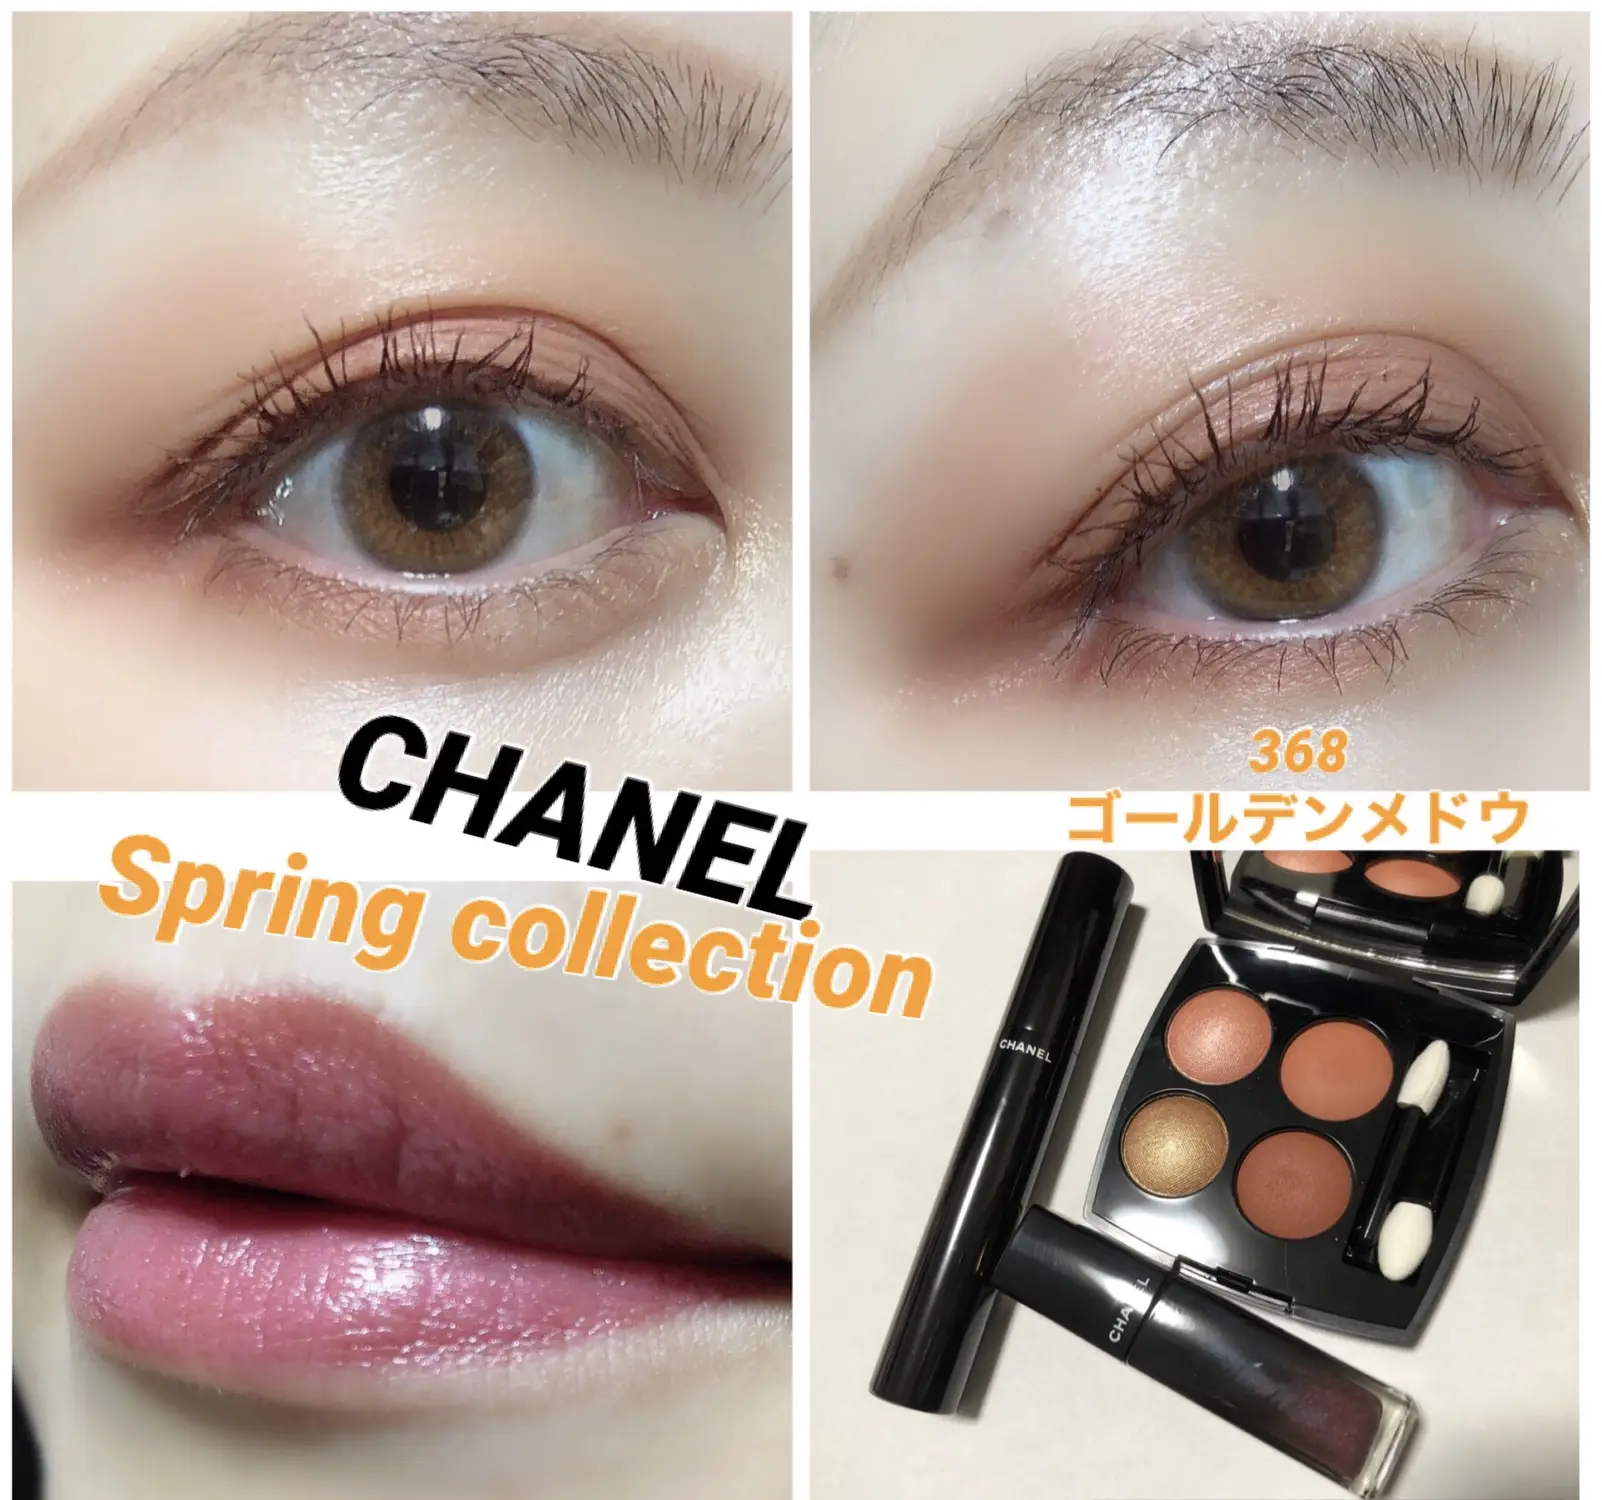 CHANEL Spring Collection ♡ Make up with Quatre 368 Golden Meadow